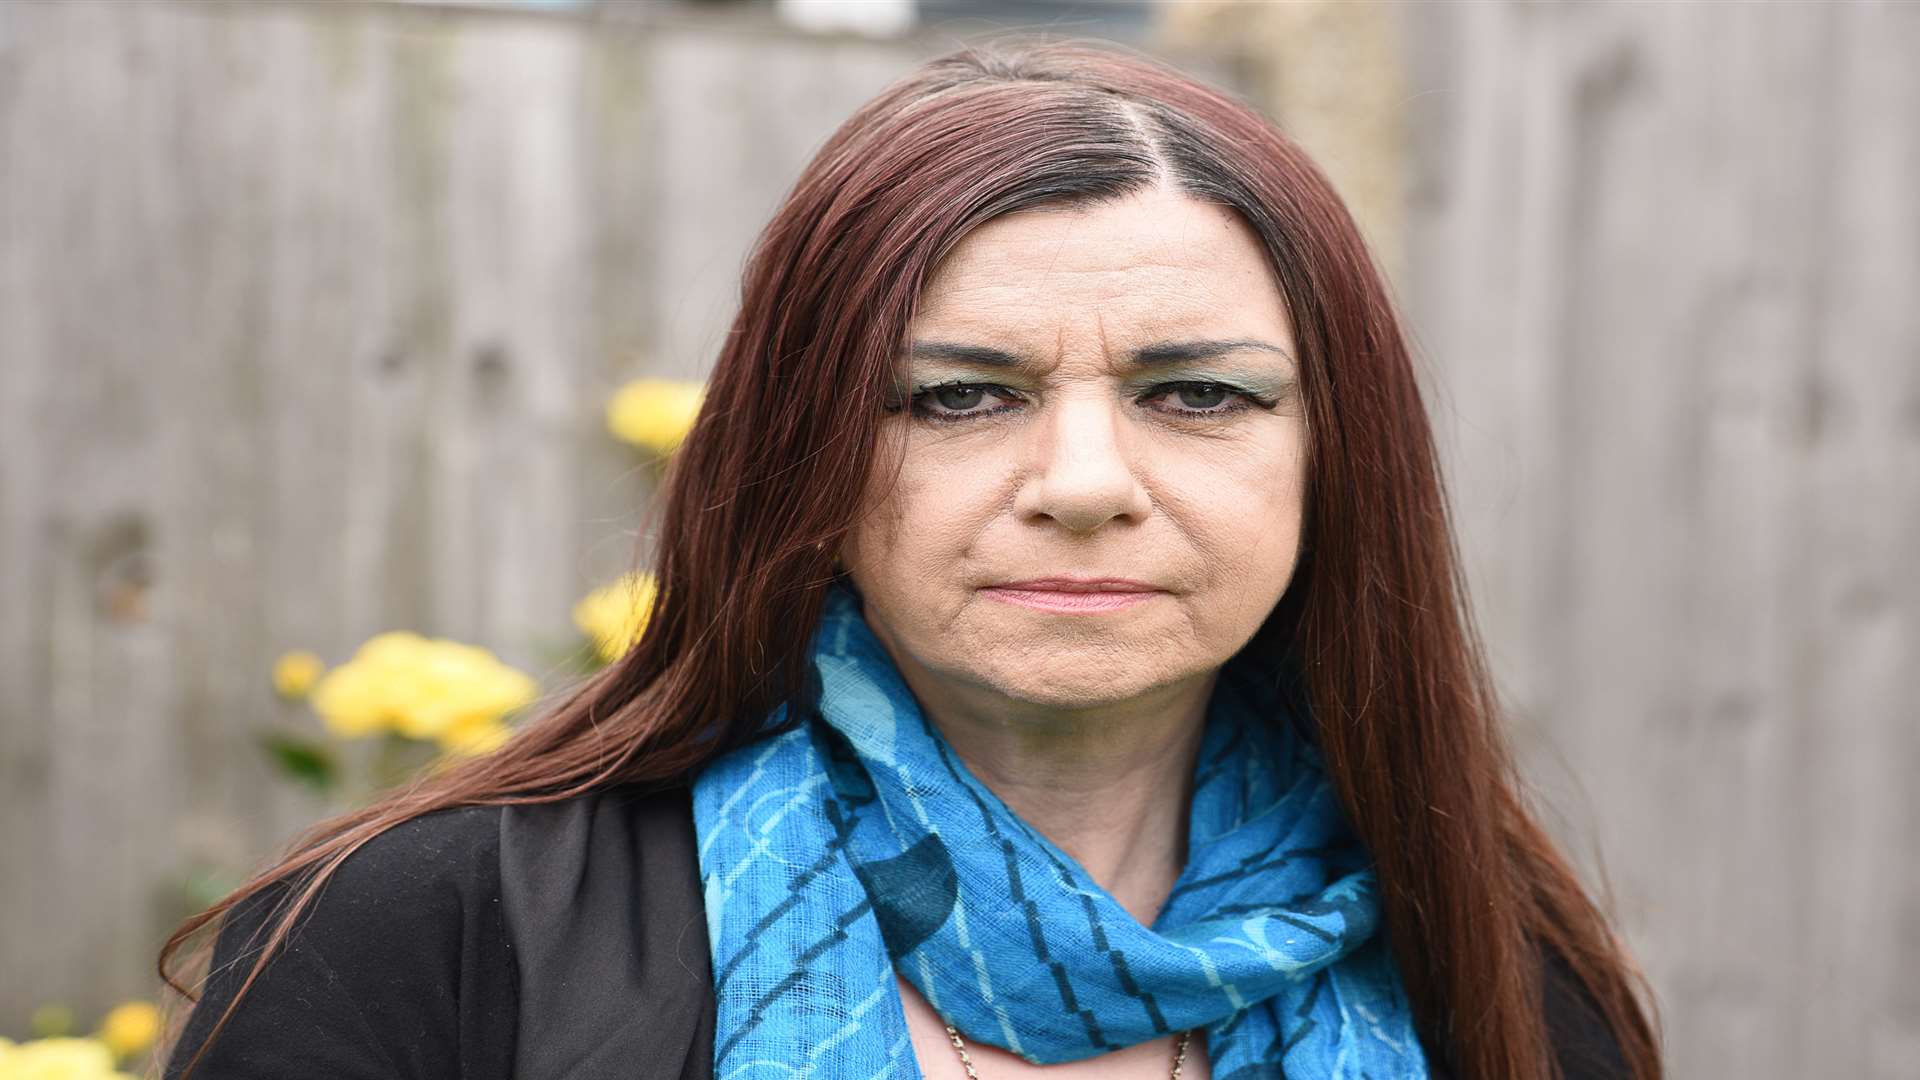 Susanne is currently living in Herne Bay after having her home repossessed